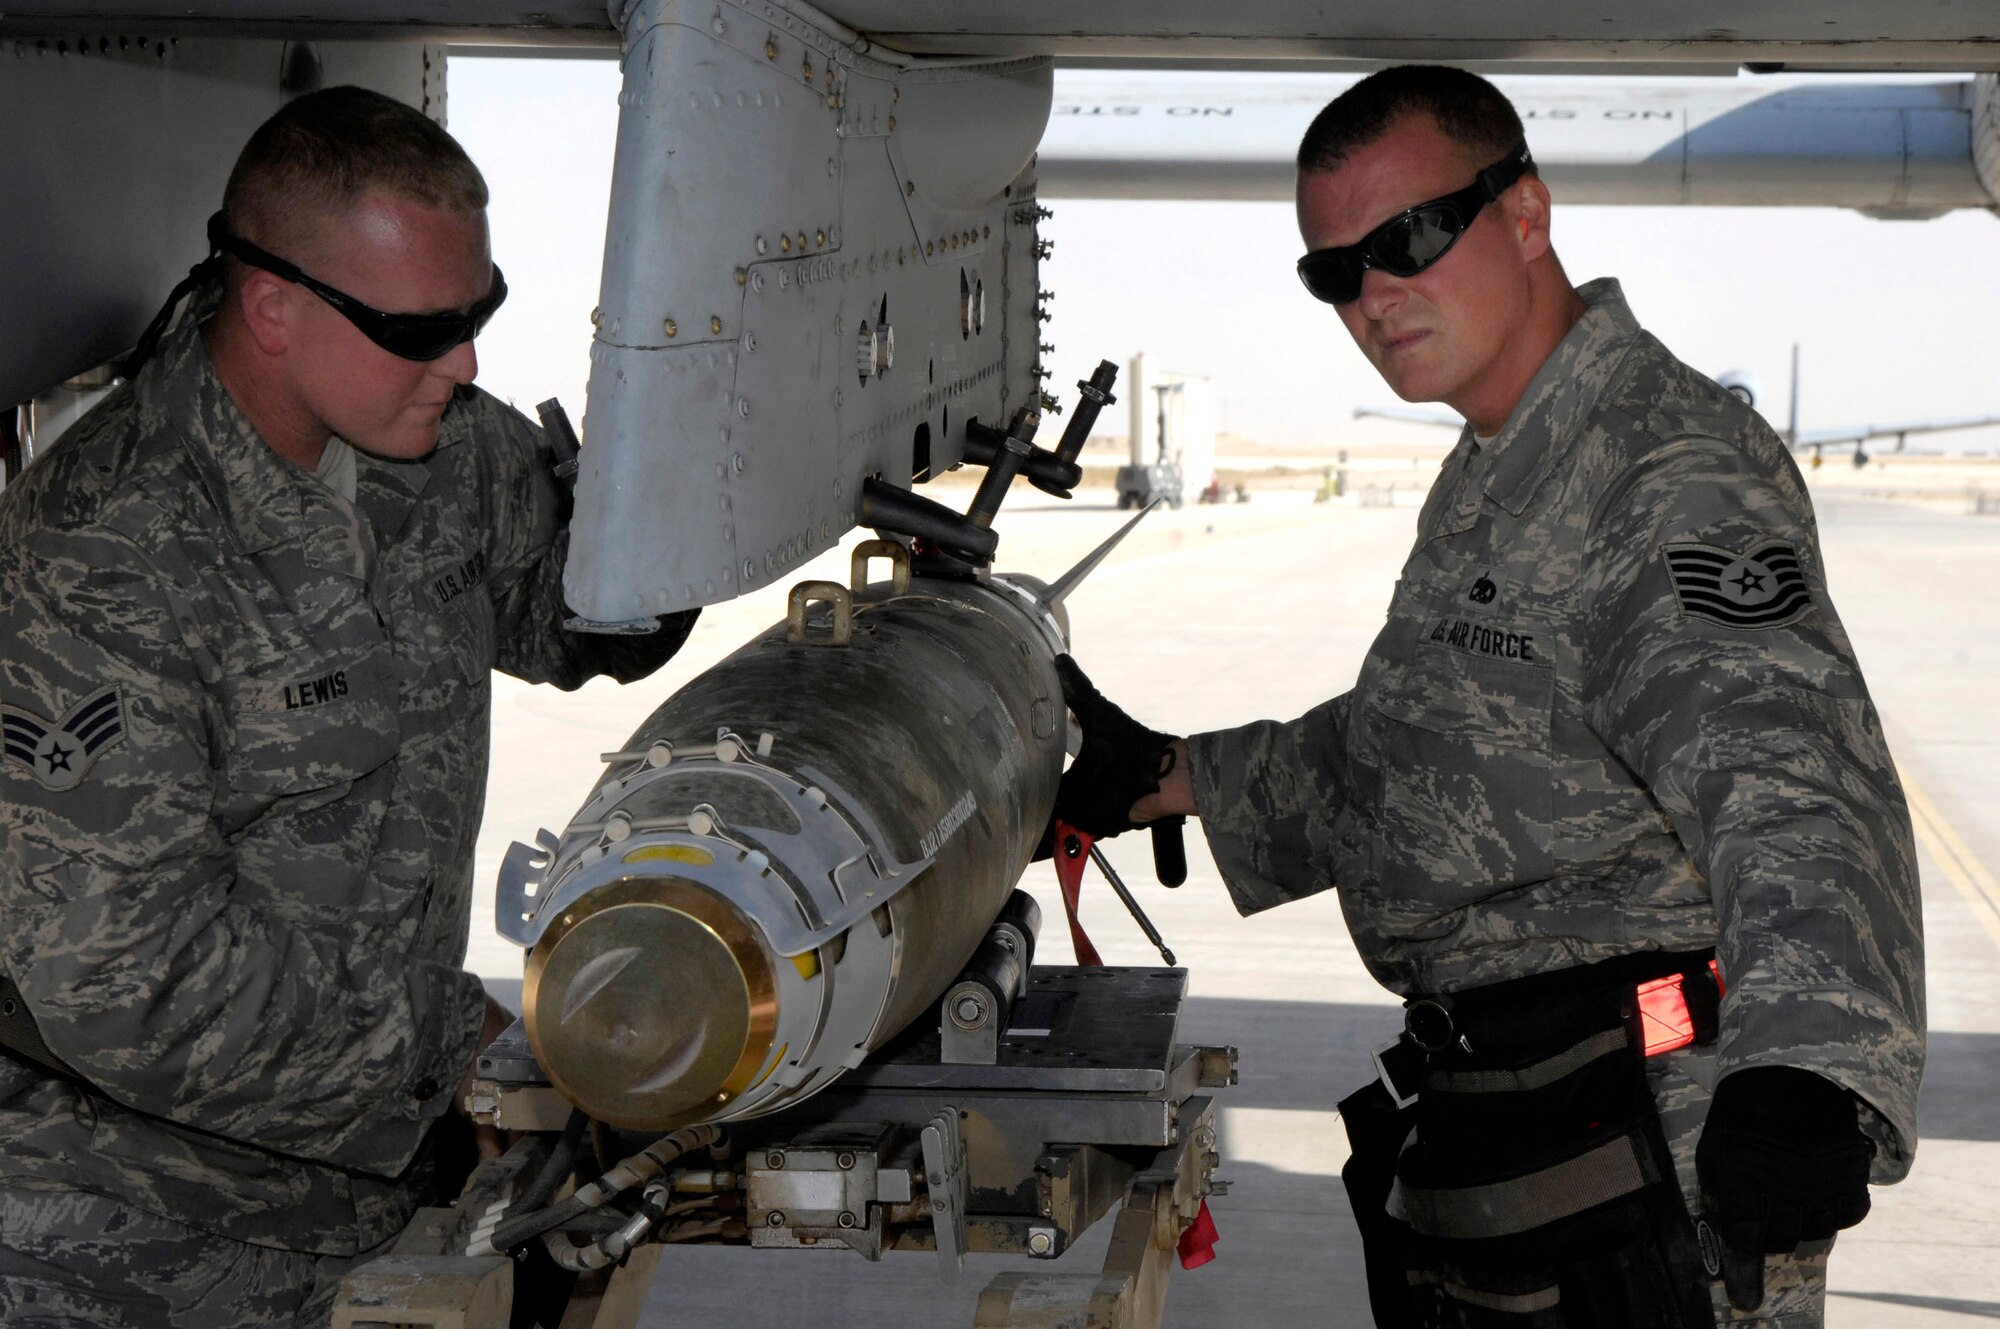 Senior Airman Larry Lewis (left) and Tech. Sgt. David Rey remove a bomb from an A-10 Thunderbolt II.  The weapons loaders are deployed to Southwest Asia from the Maryland Air National Guard's 175th Wing.  The A-10, with excellent maneuverability and accurate weapons delivery, provide vital close-air support to coalition troops on the ground.  (U.S. Air Force official photo by Staff Sgt Angelique Perez)